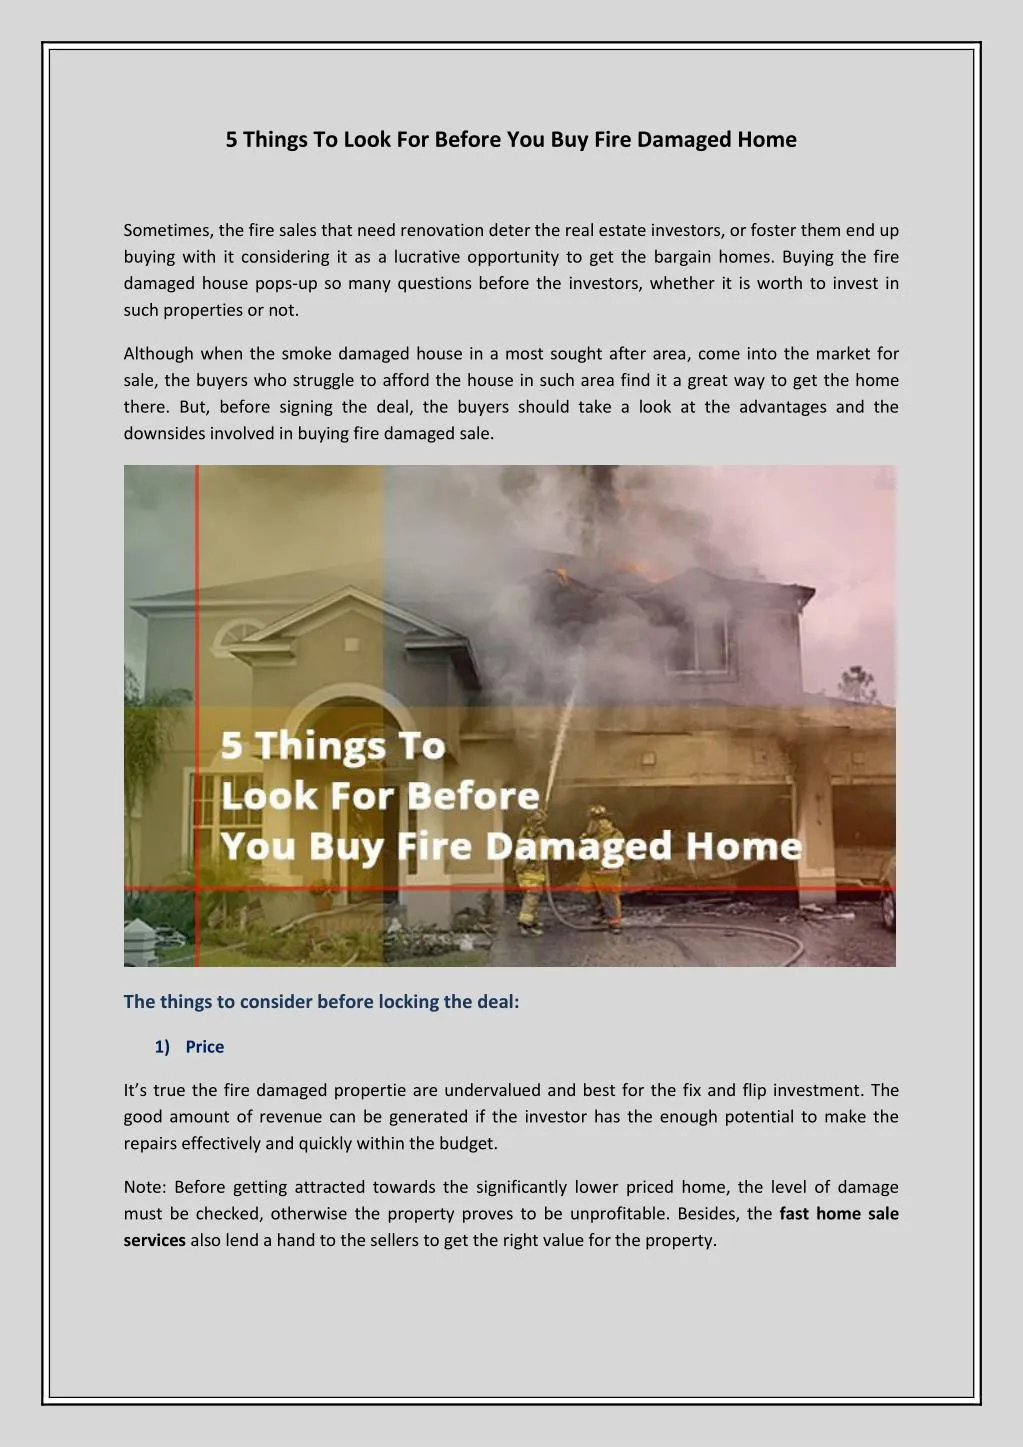 5 things to look for before you buy fire damaged